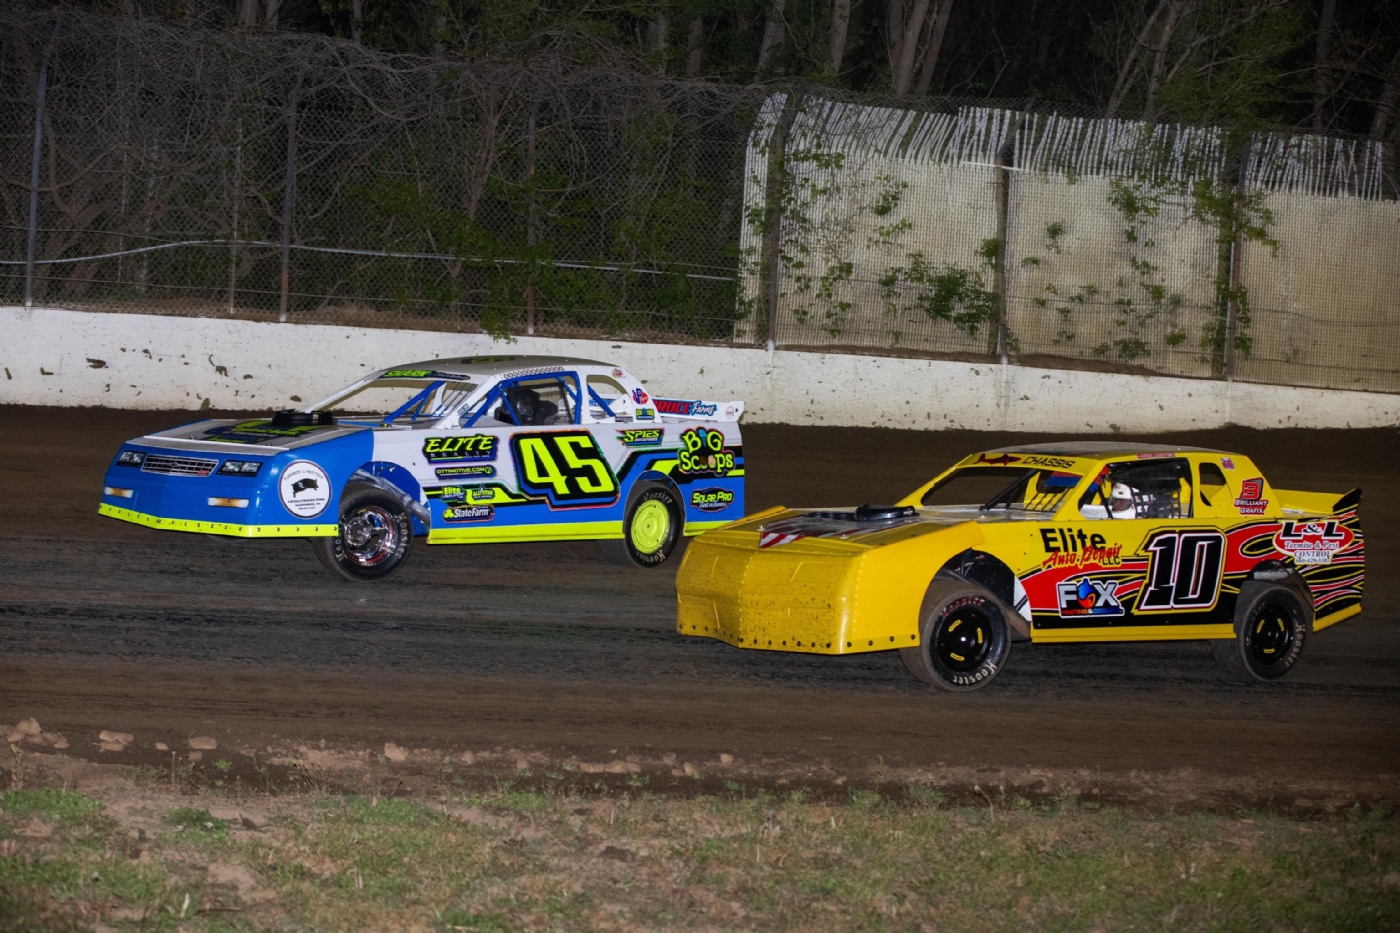 Aaron Poe (45) and Marc Carter (10) compete for the win on opening night at Central Missouri Speedway!  Photo by Josh Allee.